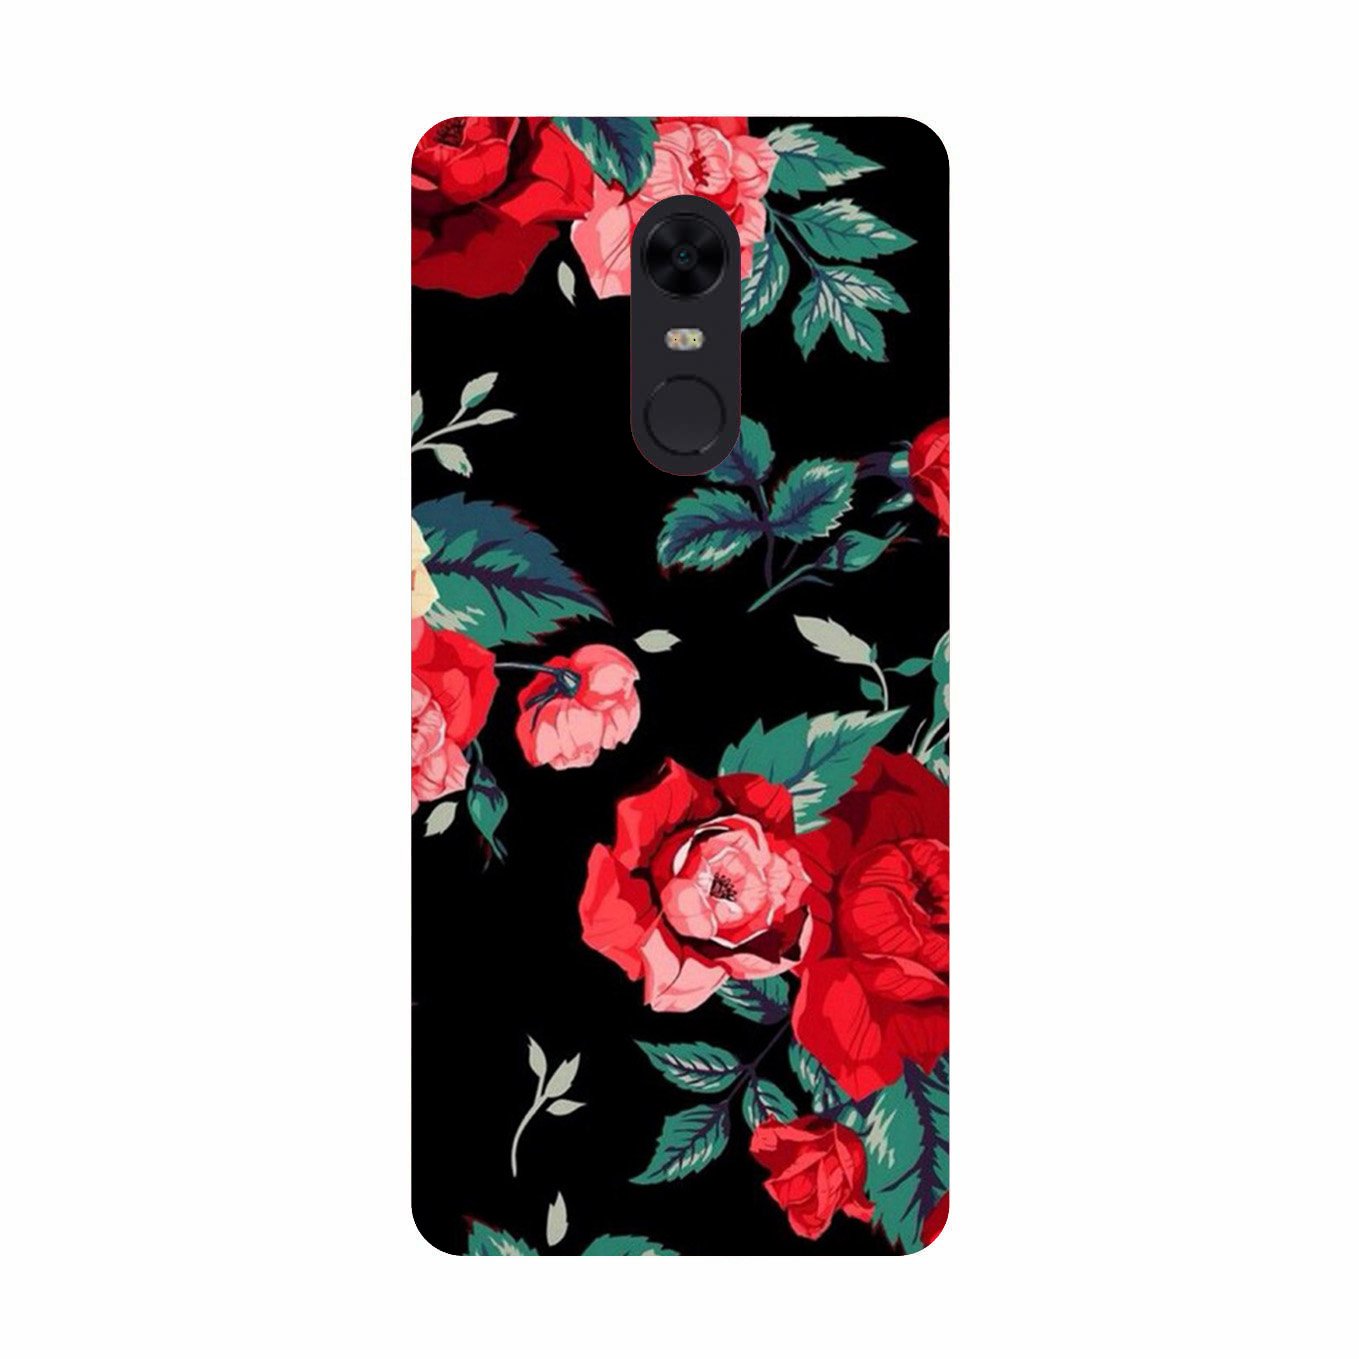 Red Rose2 Case for Redmi 5